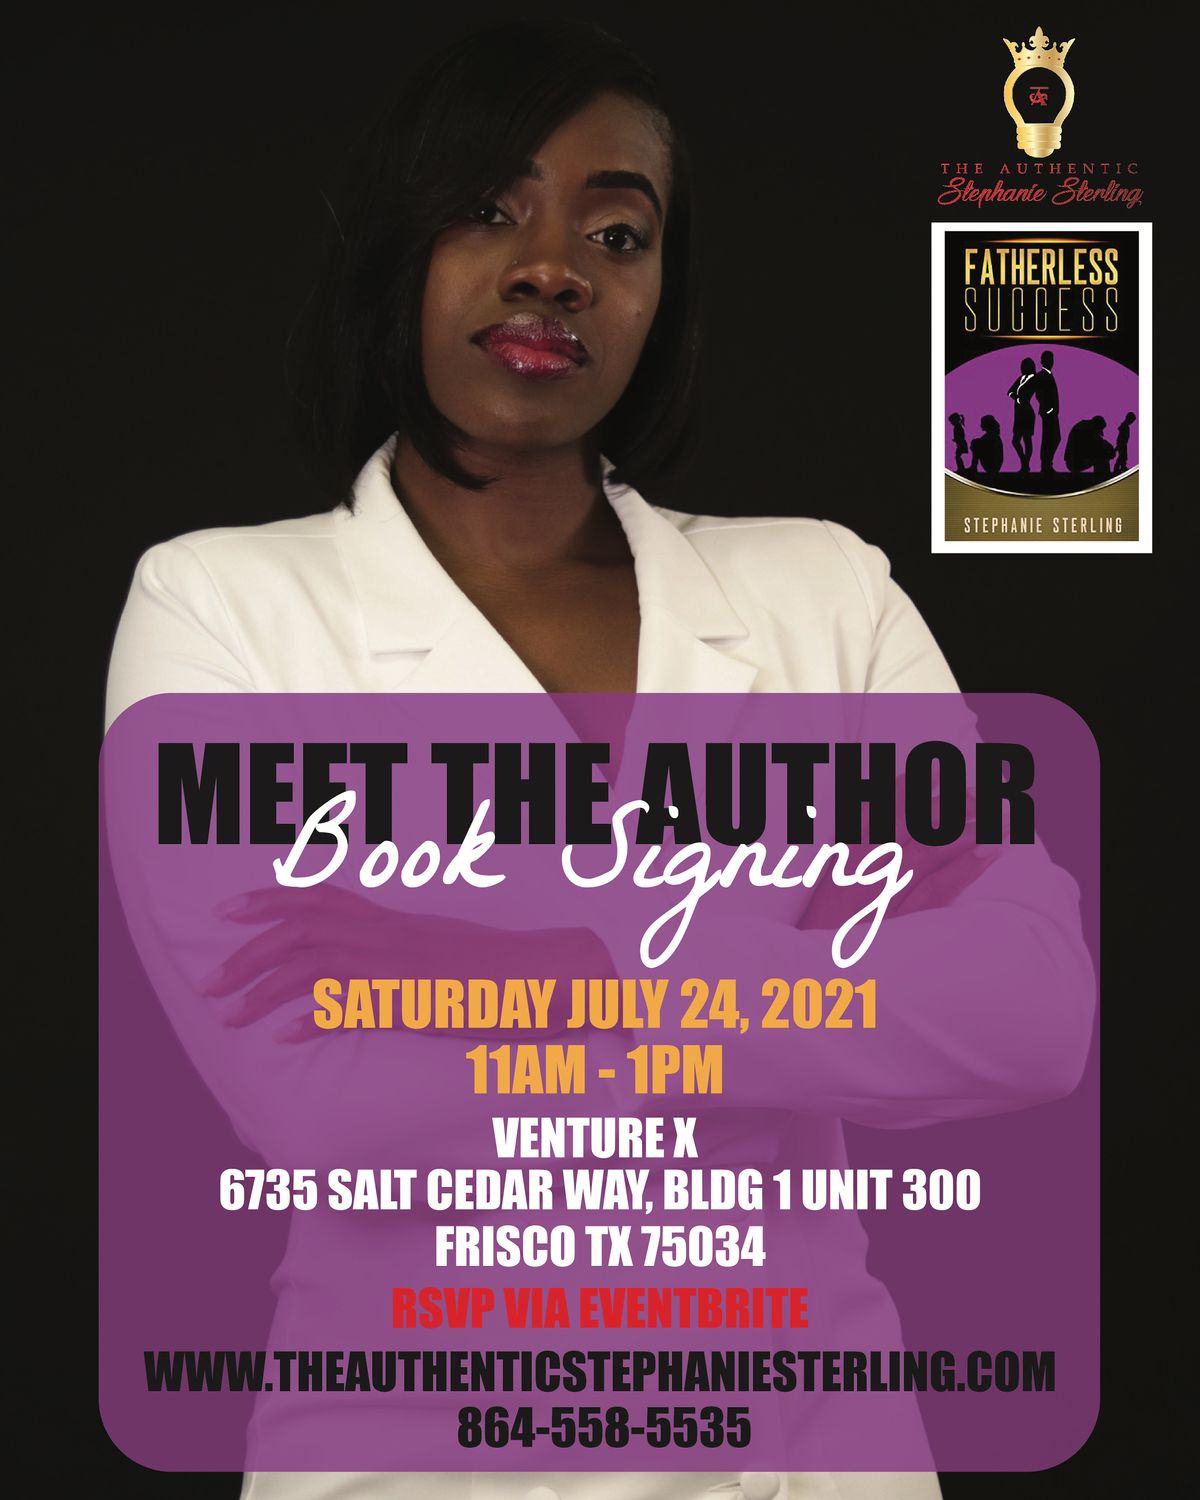 Meet The Author: Book Signing